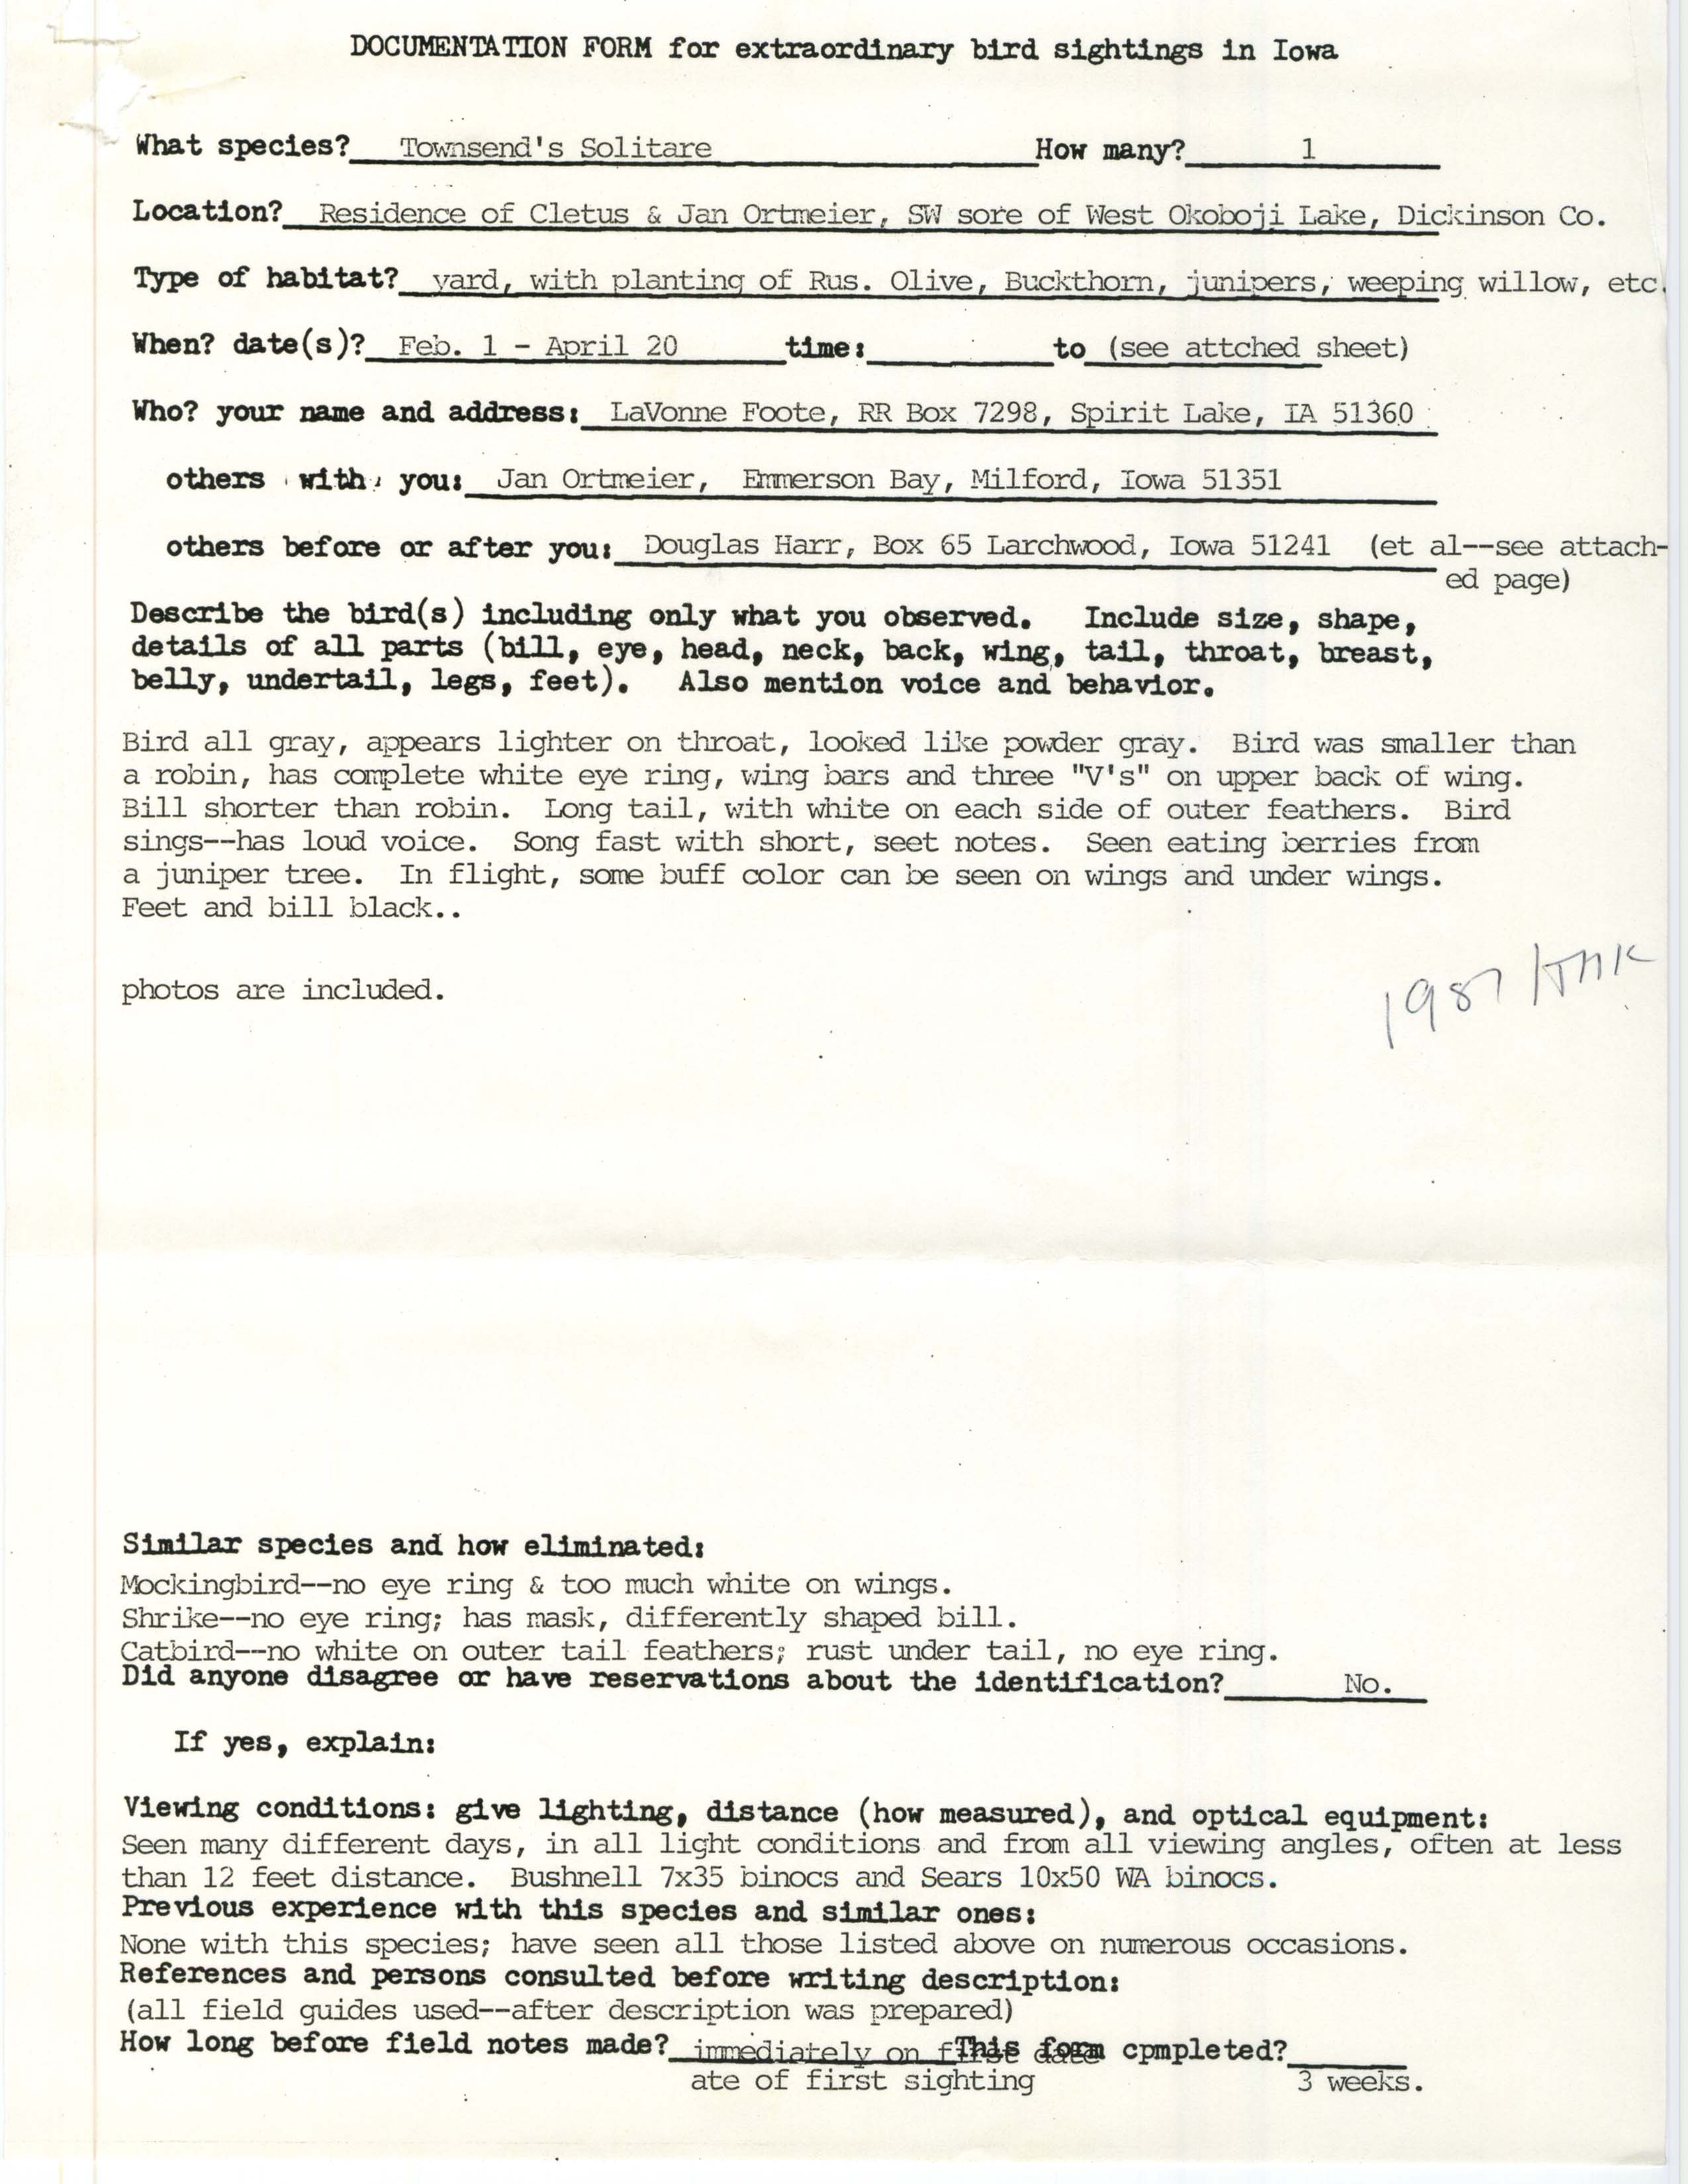 Rare bird documentation form for Townsend's Solitaire at West Okoboji Lake in 1987